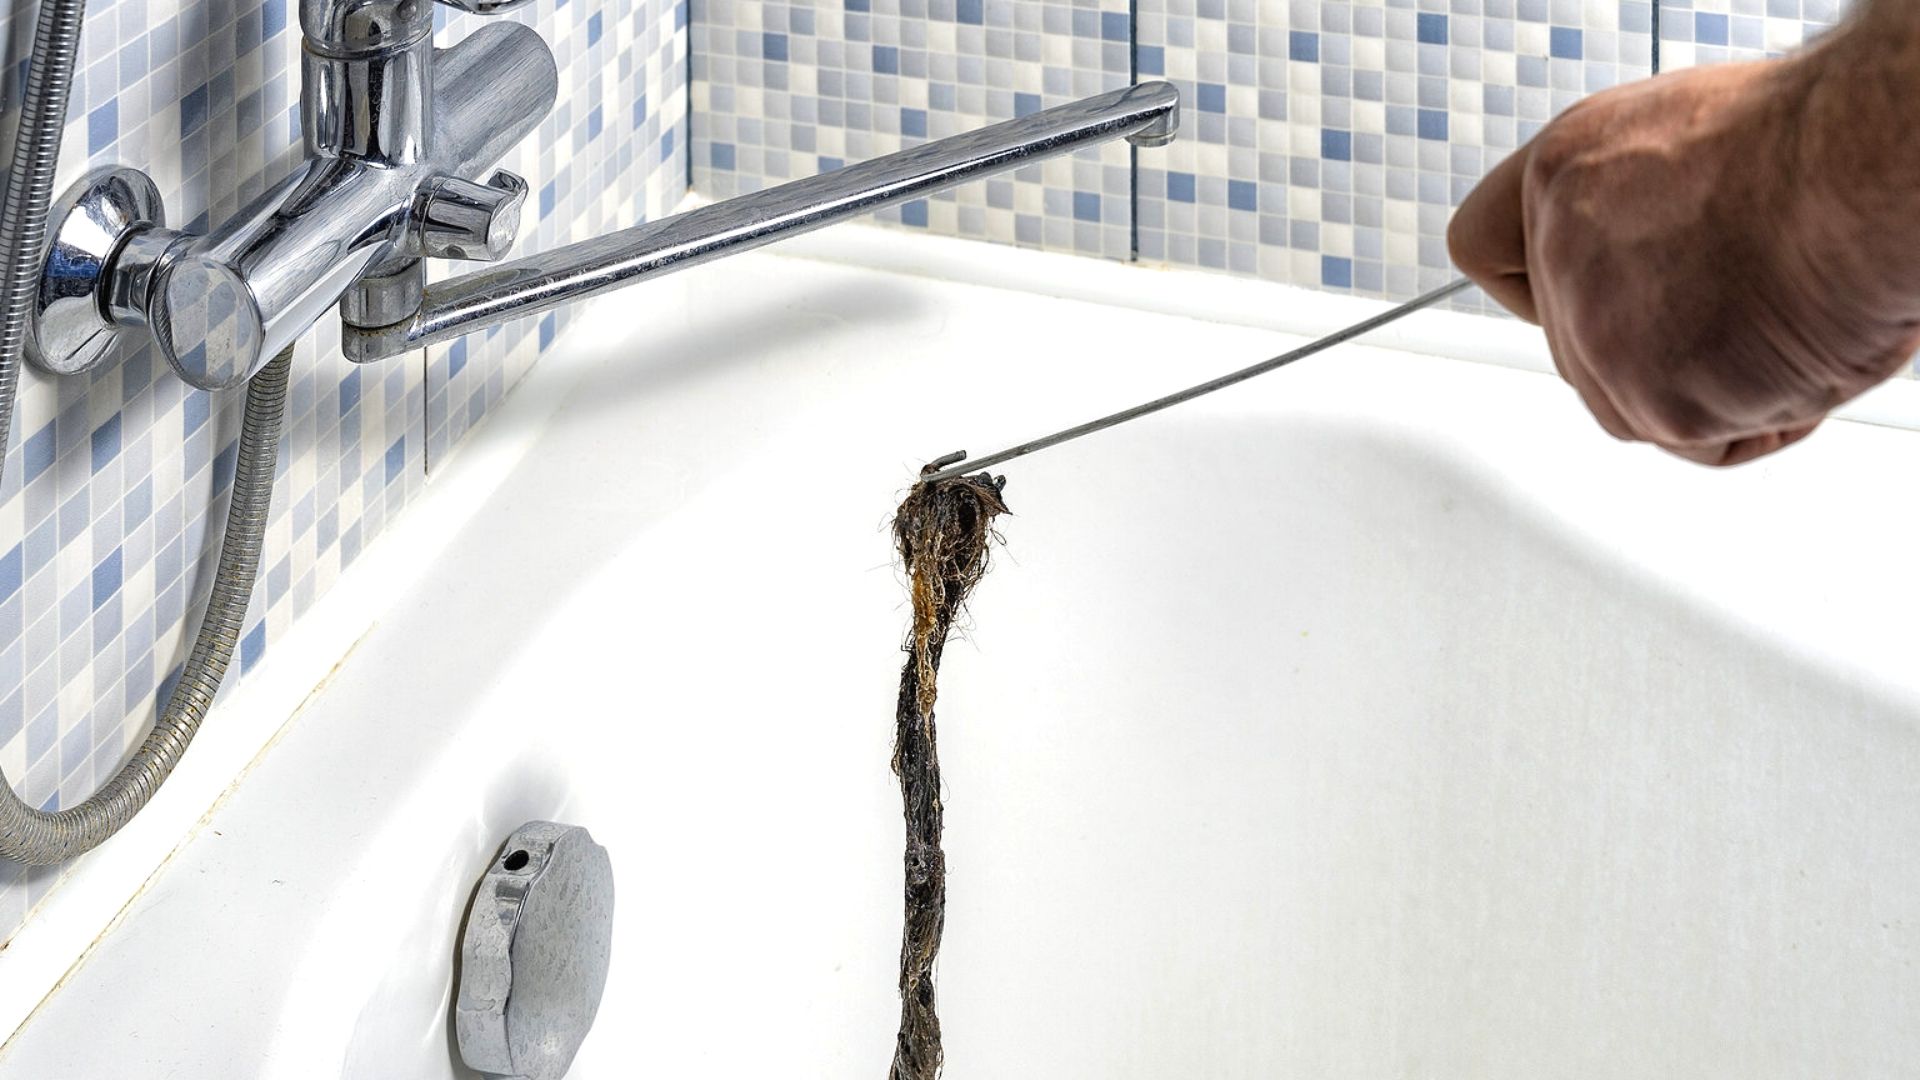 How to Snake Bathtub Drain through Overflow with Electric Auger